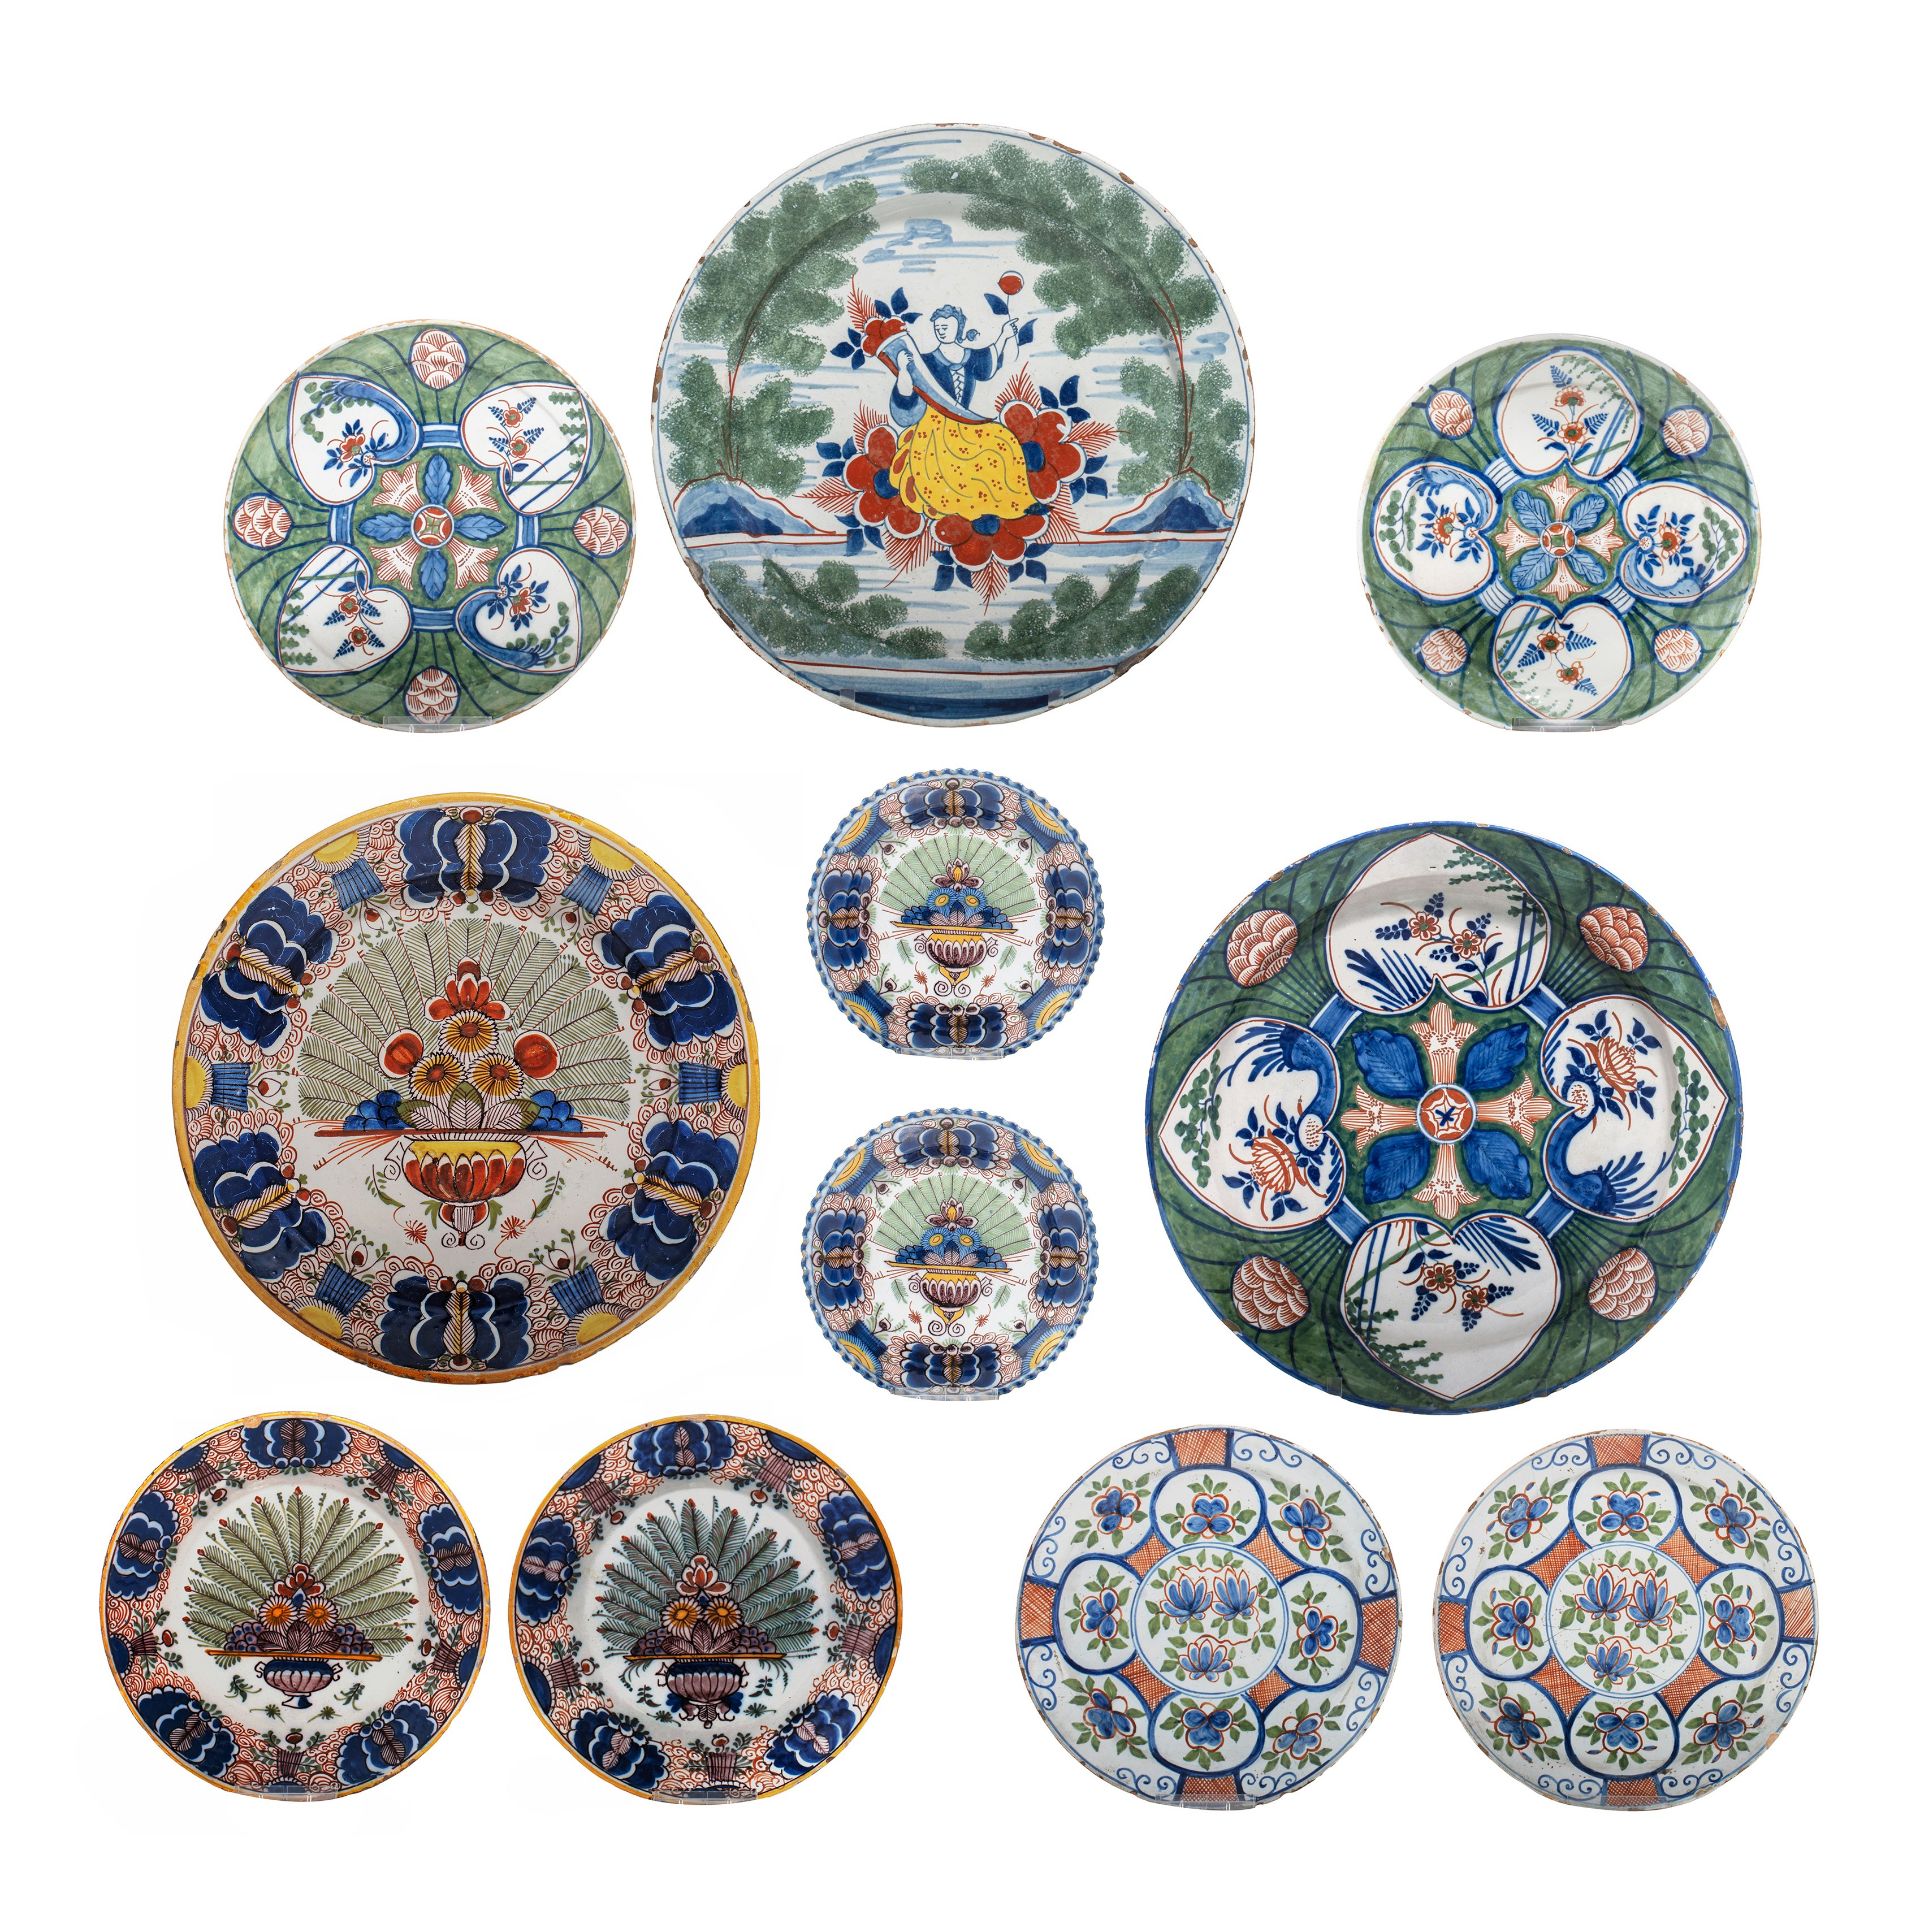 A various collection of eleven 18thC polychrome Dutch Delft dishes, ø 16,5 - 34,5 cm